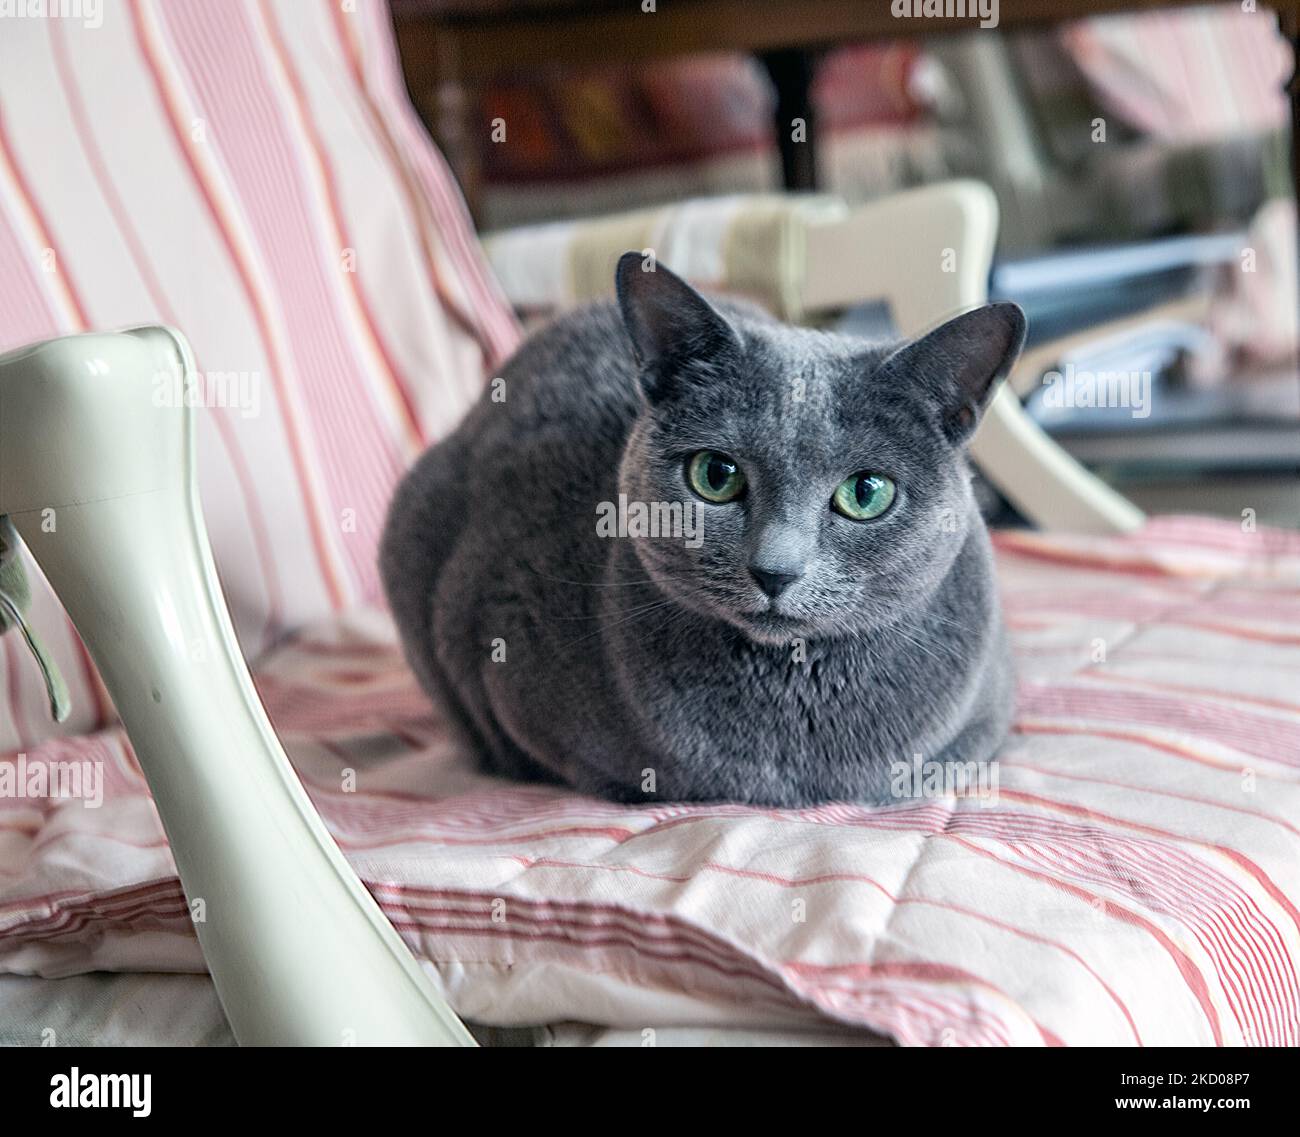 Russian Blue cat on a chair Stock Photo